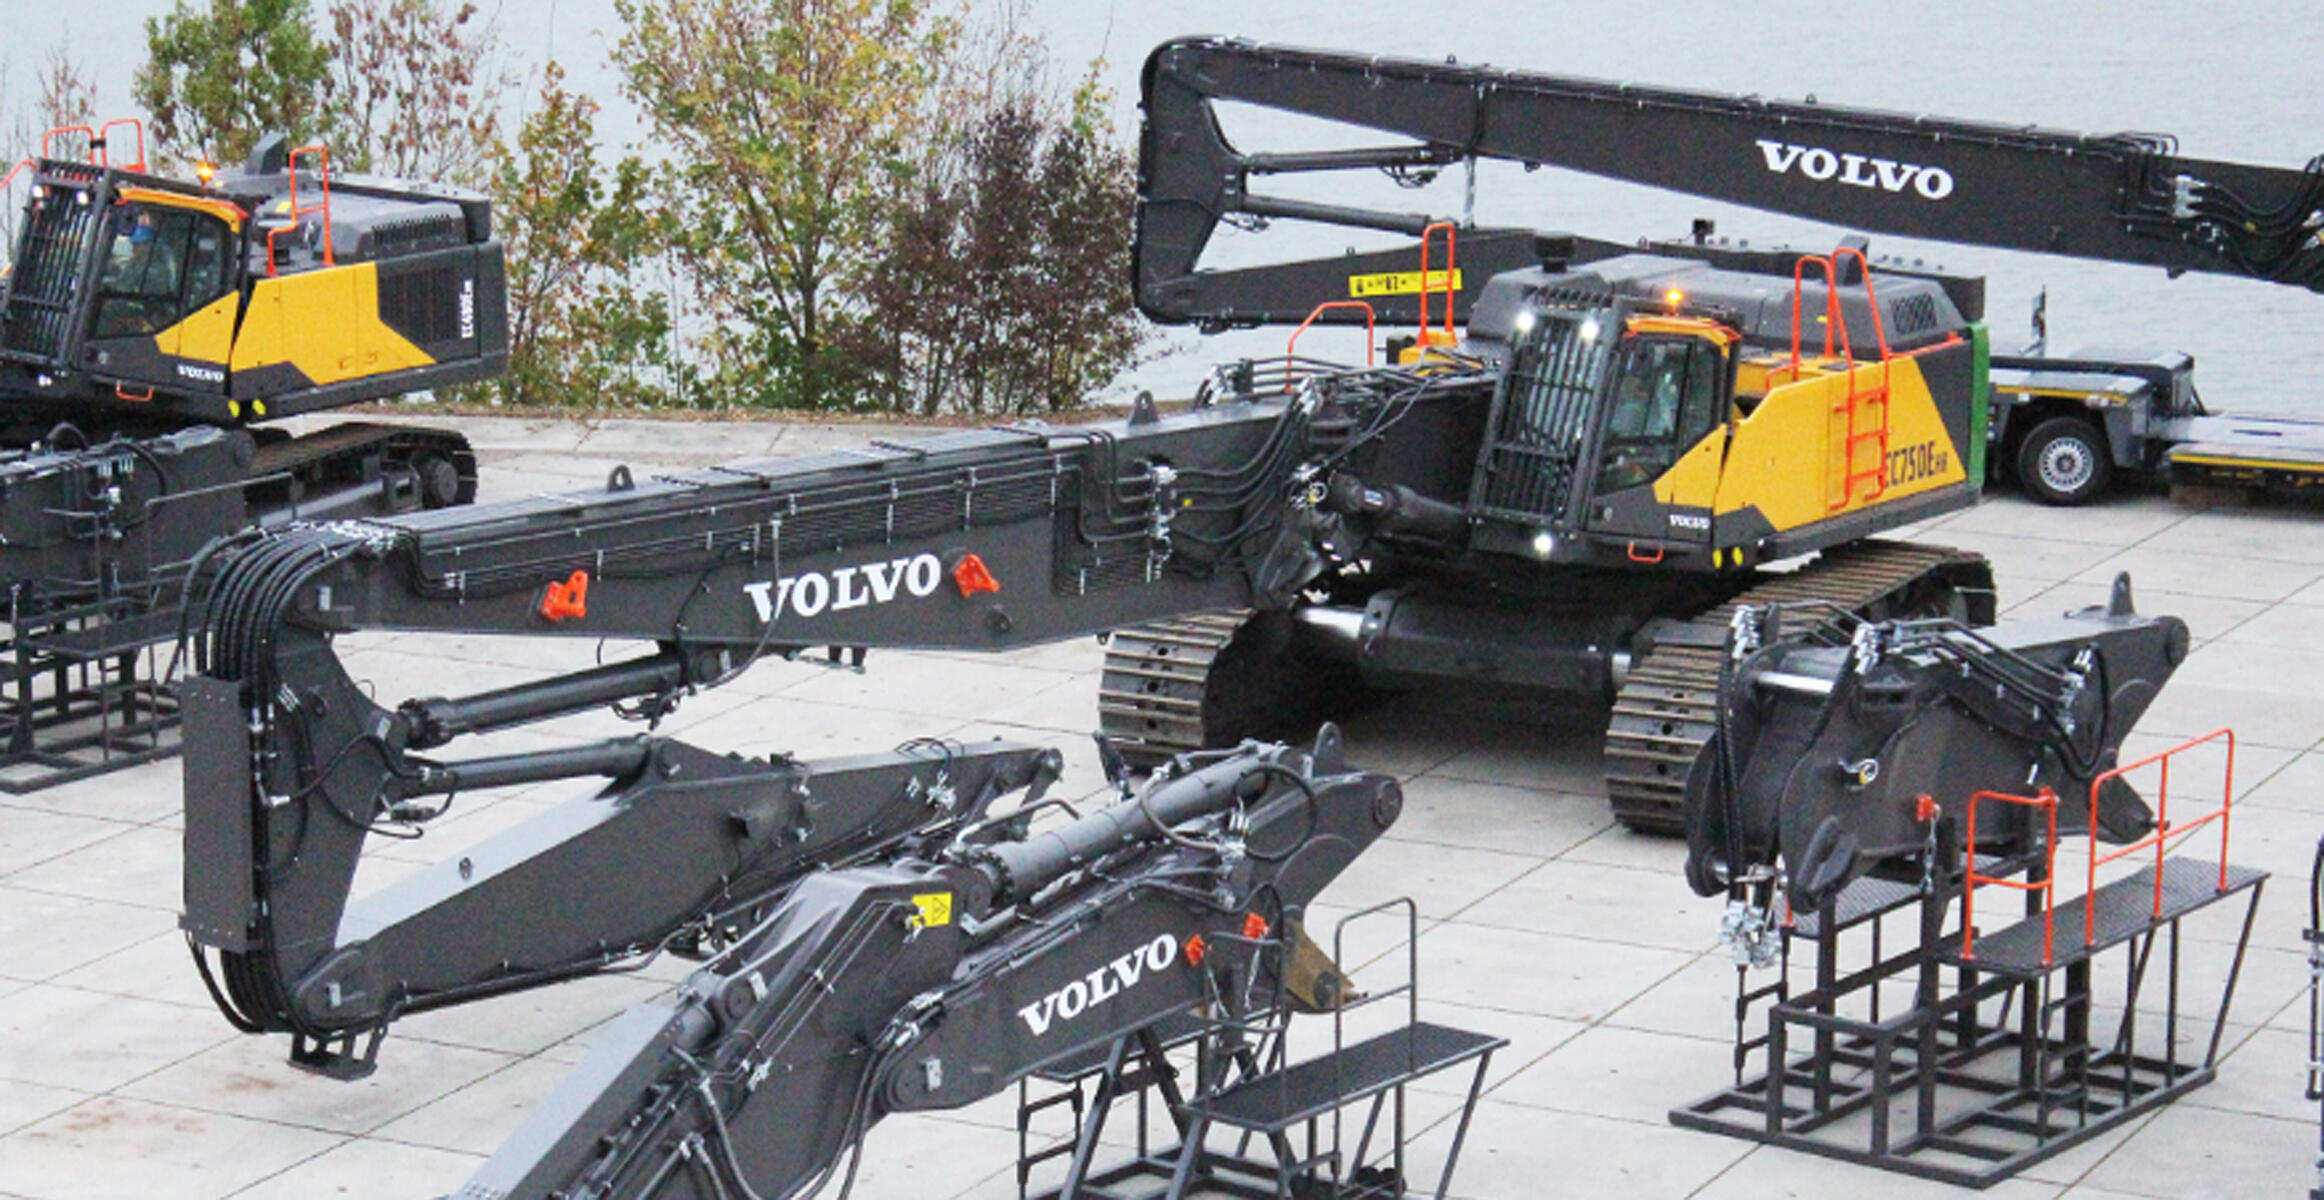 The first Volvo EC750E HR demolition excavator together with its boom sets